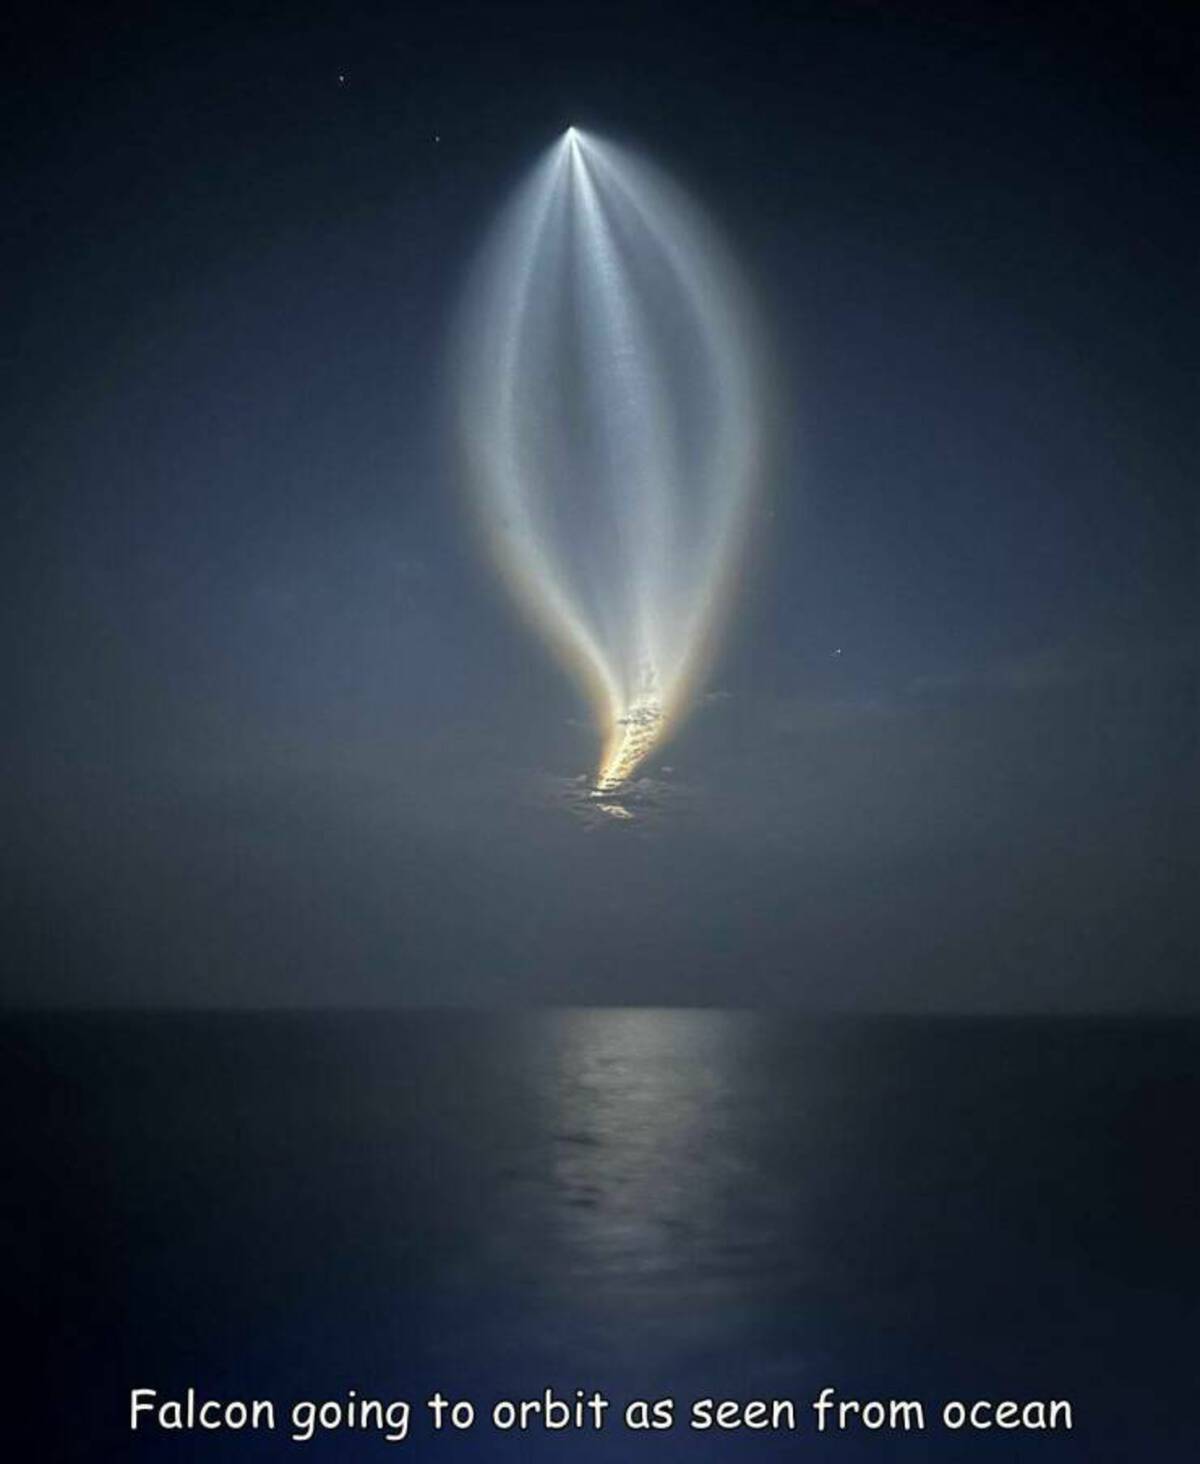 darkness - Falcon going to orbit as seen from ocean